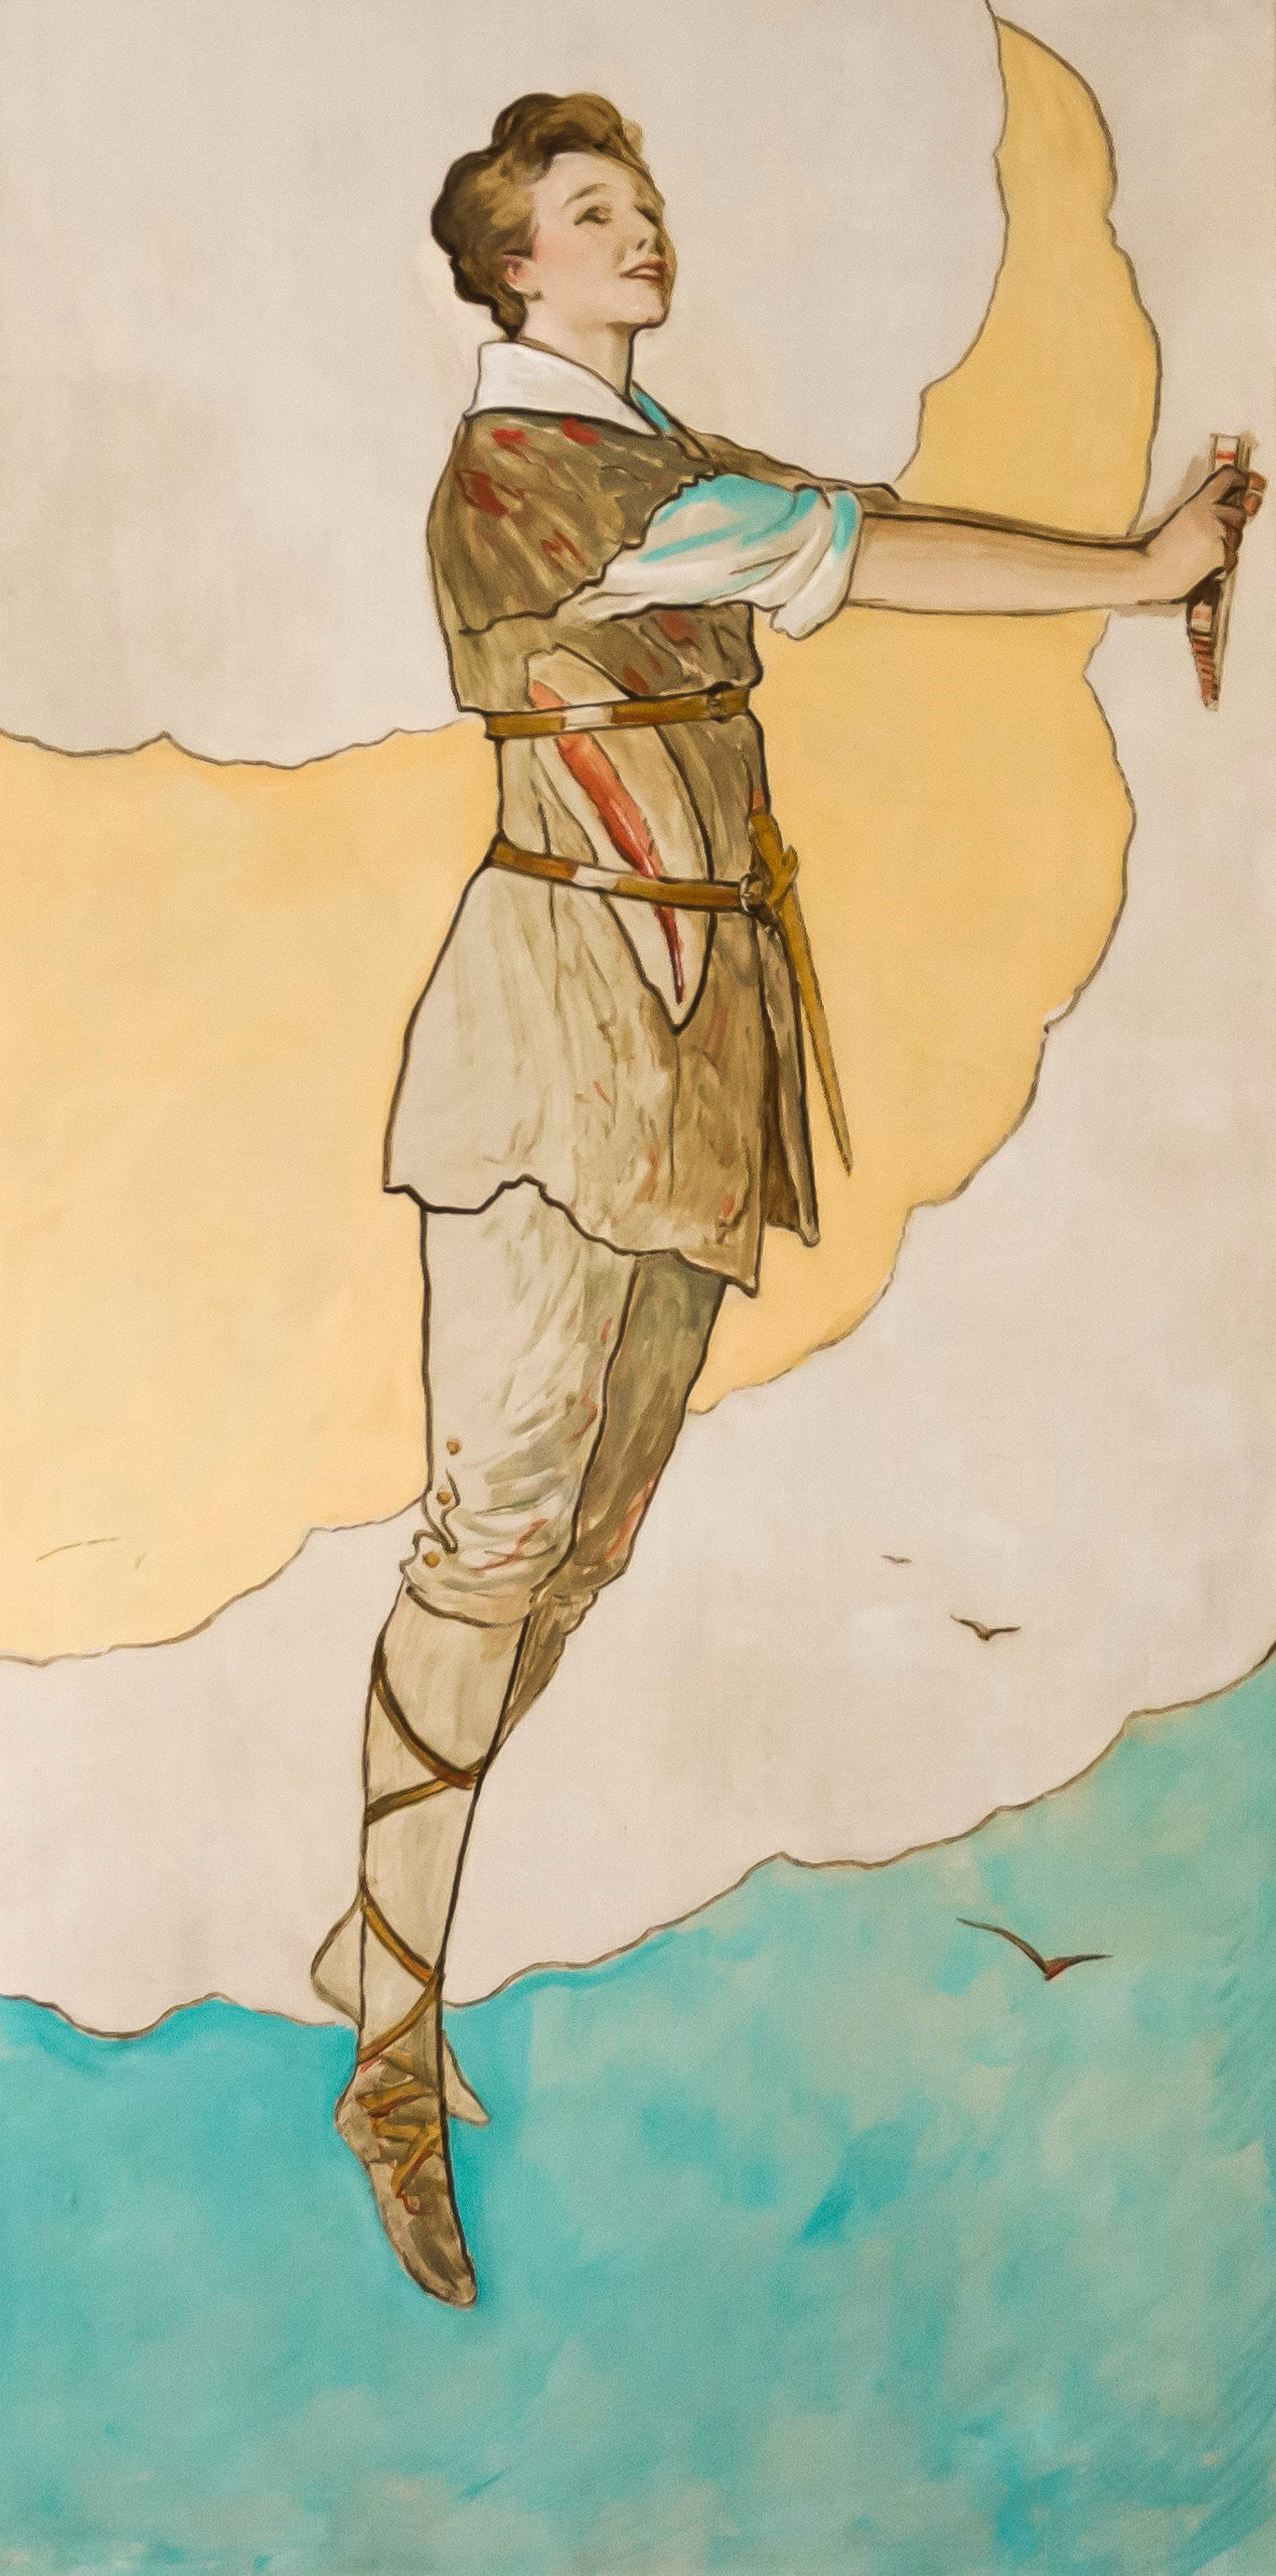 A woman, dressed as Peter Pan, flying upright, in profile, against bands of color representing the heavens